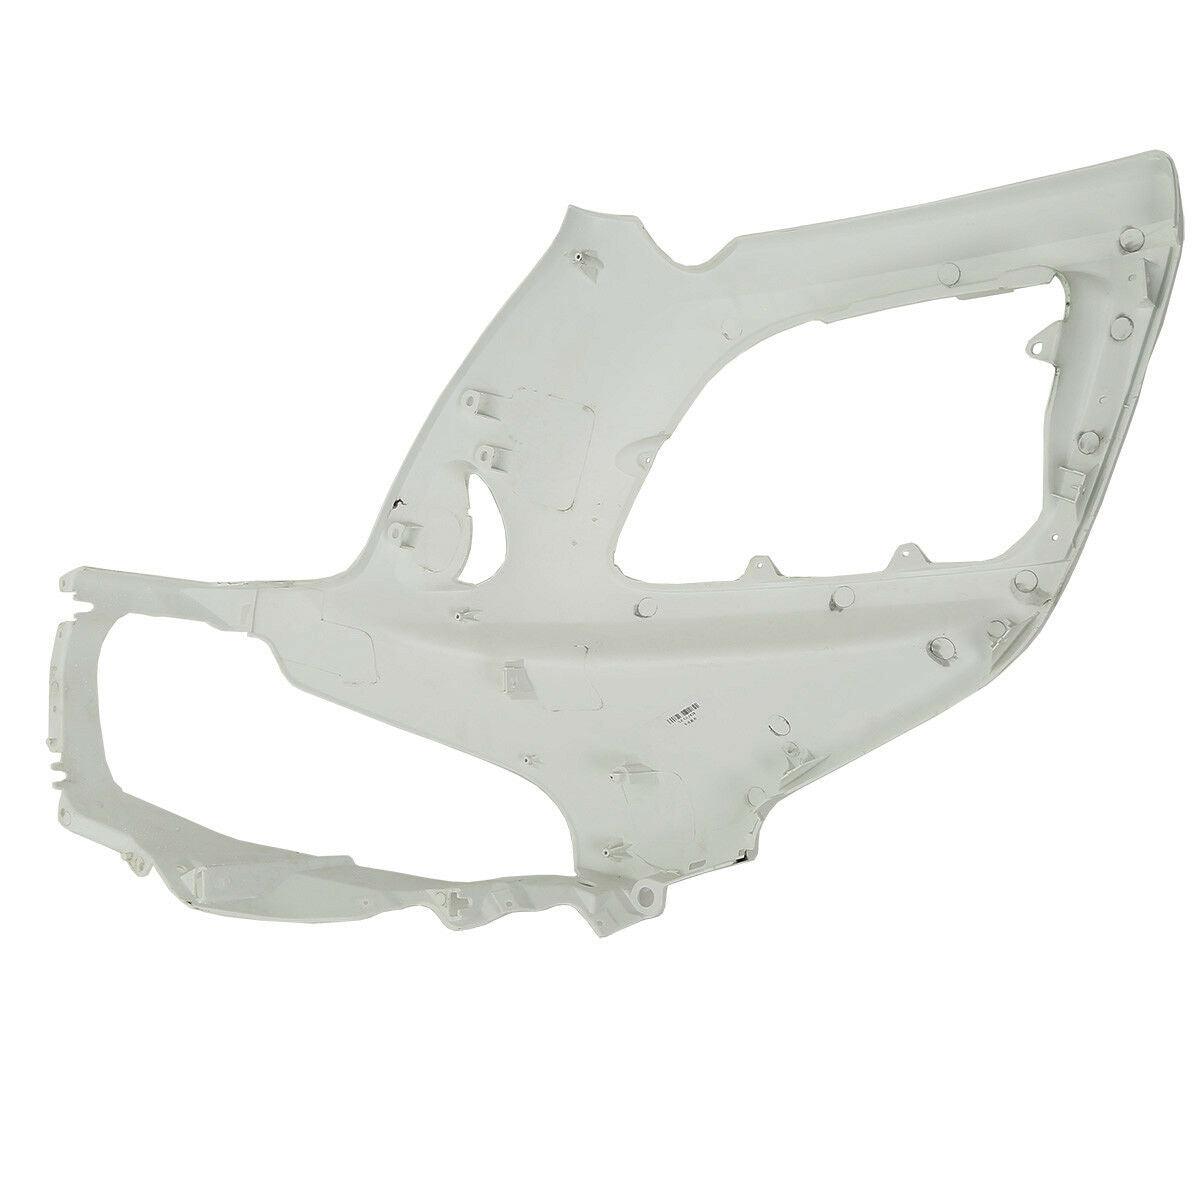 Left Front Cowl Fairing Cover FitFor Honda Goldwing GL1800 01-11 Unpainted White - Moto Life Products